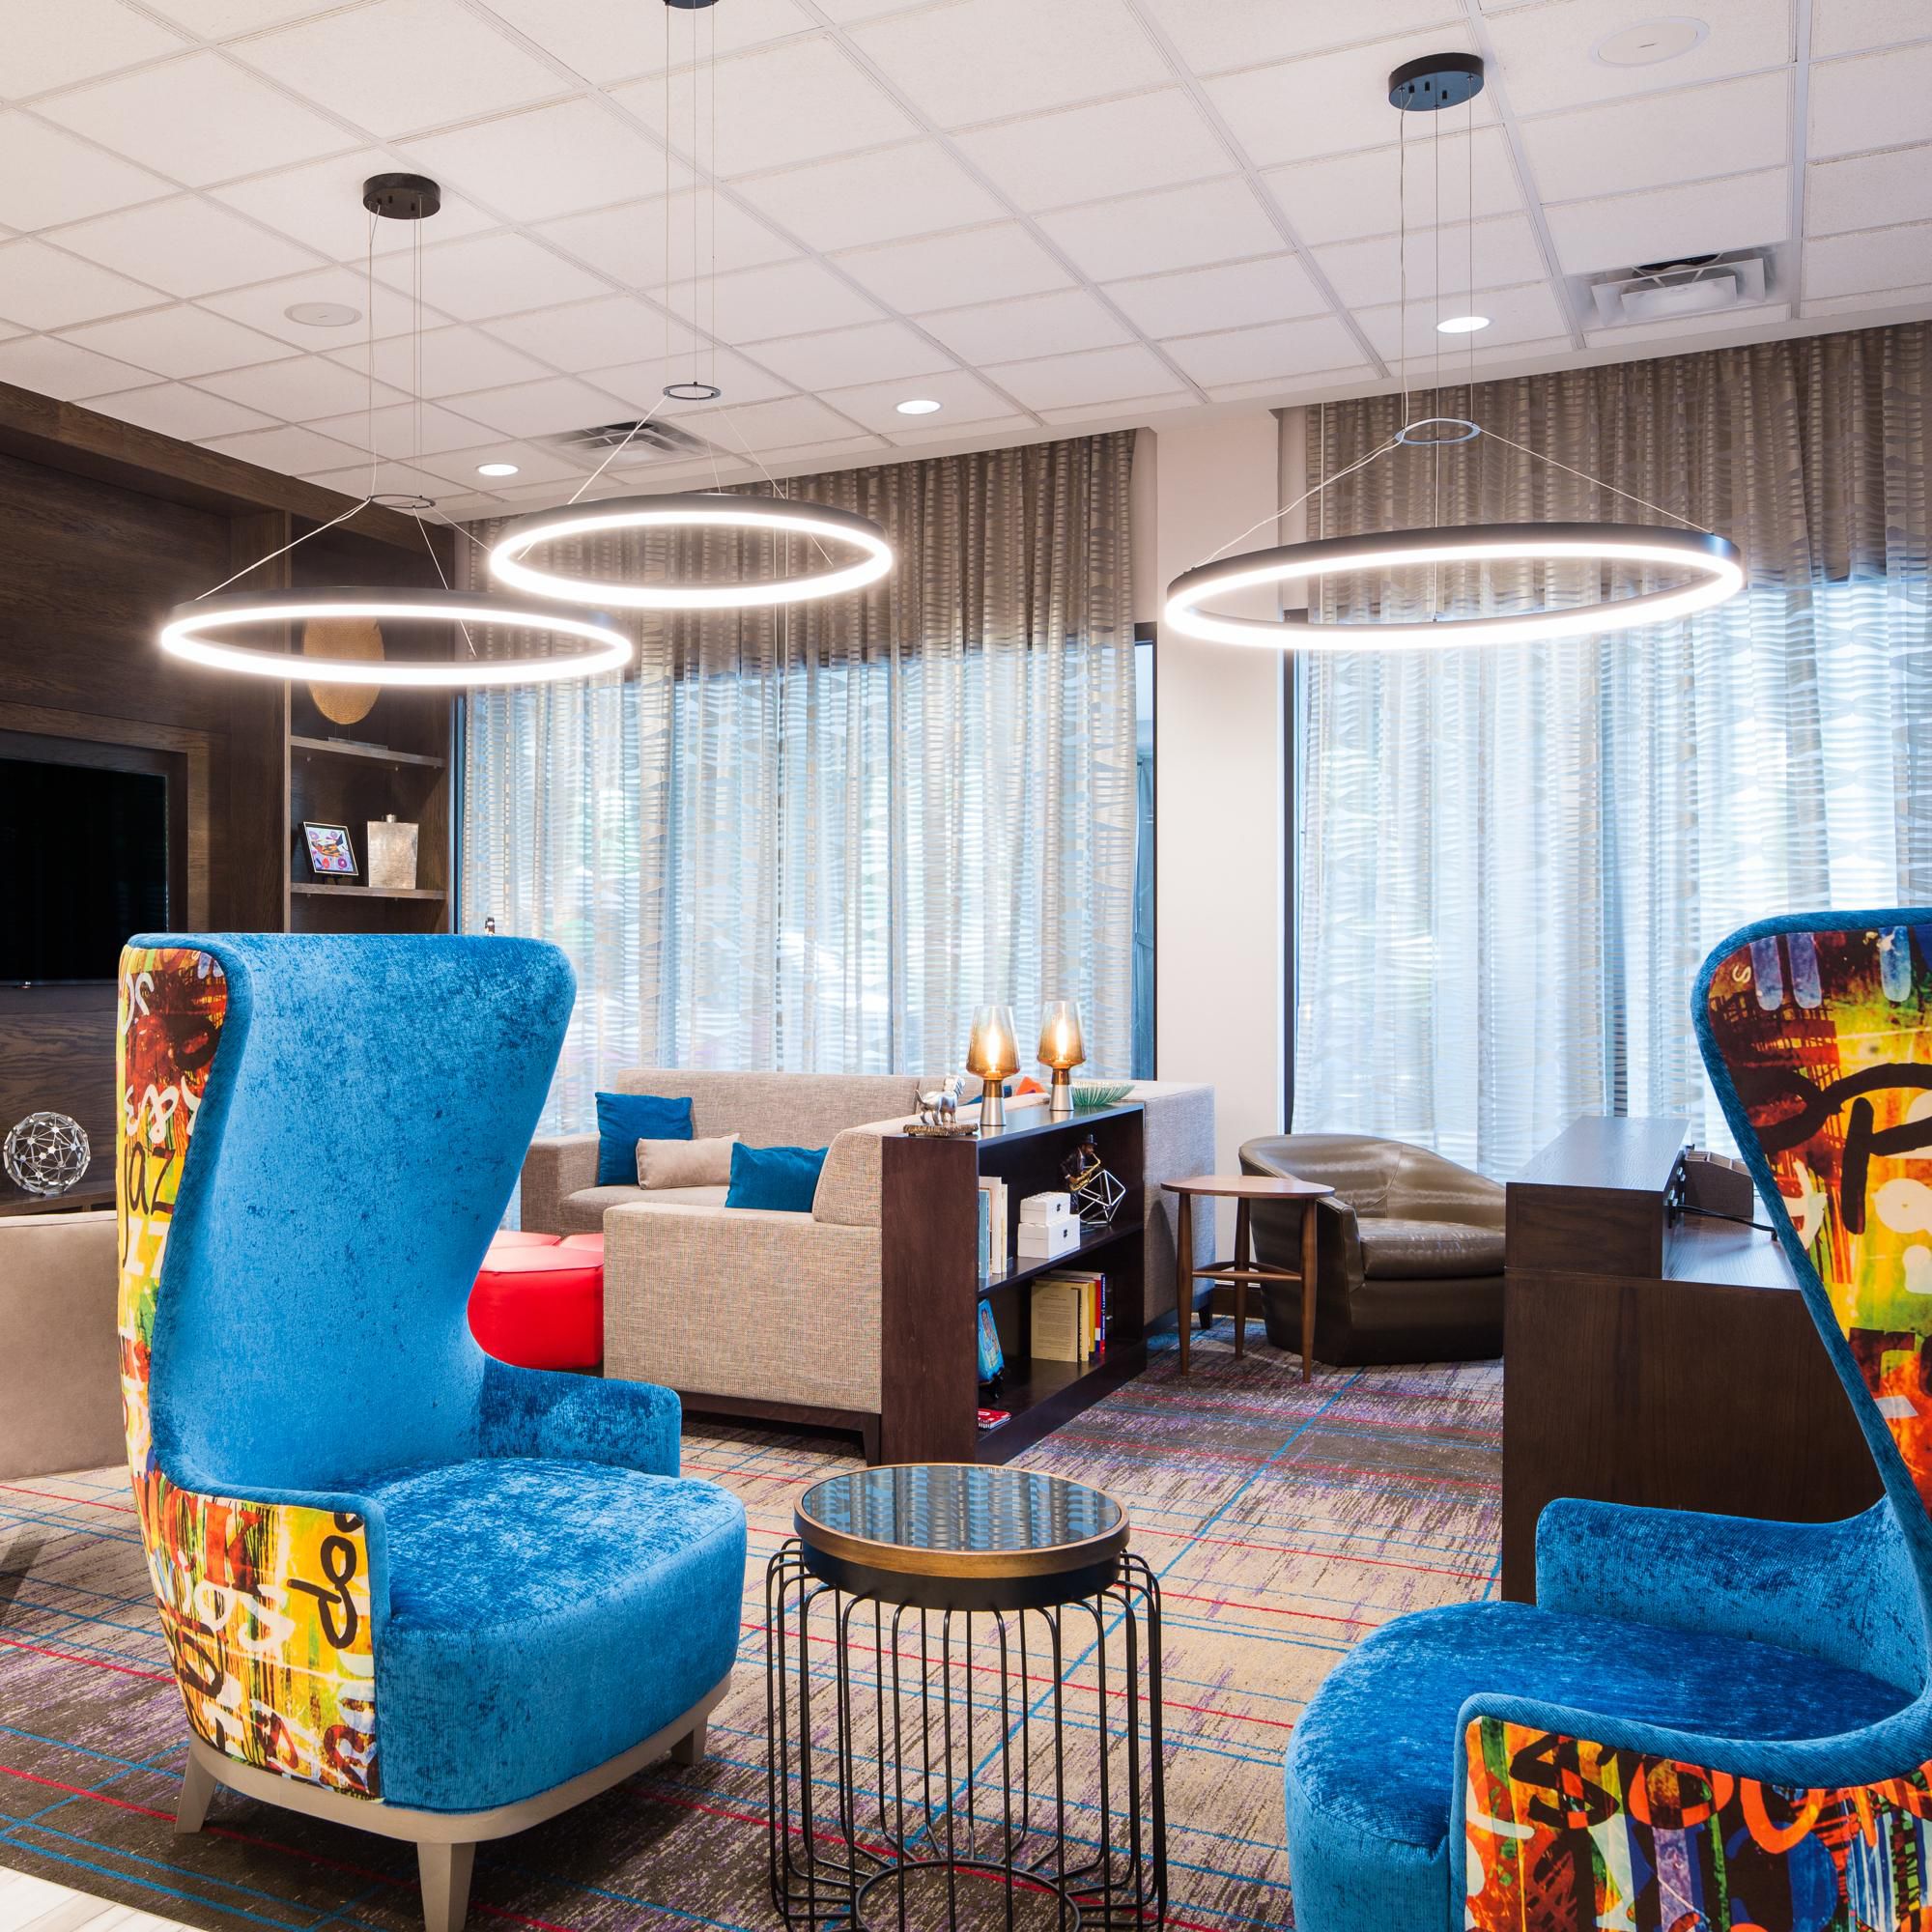 Our downtown Memphis hotel was recently renovated and updated